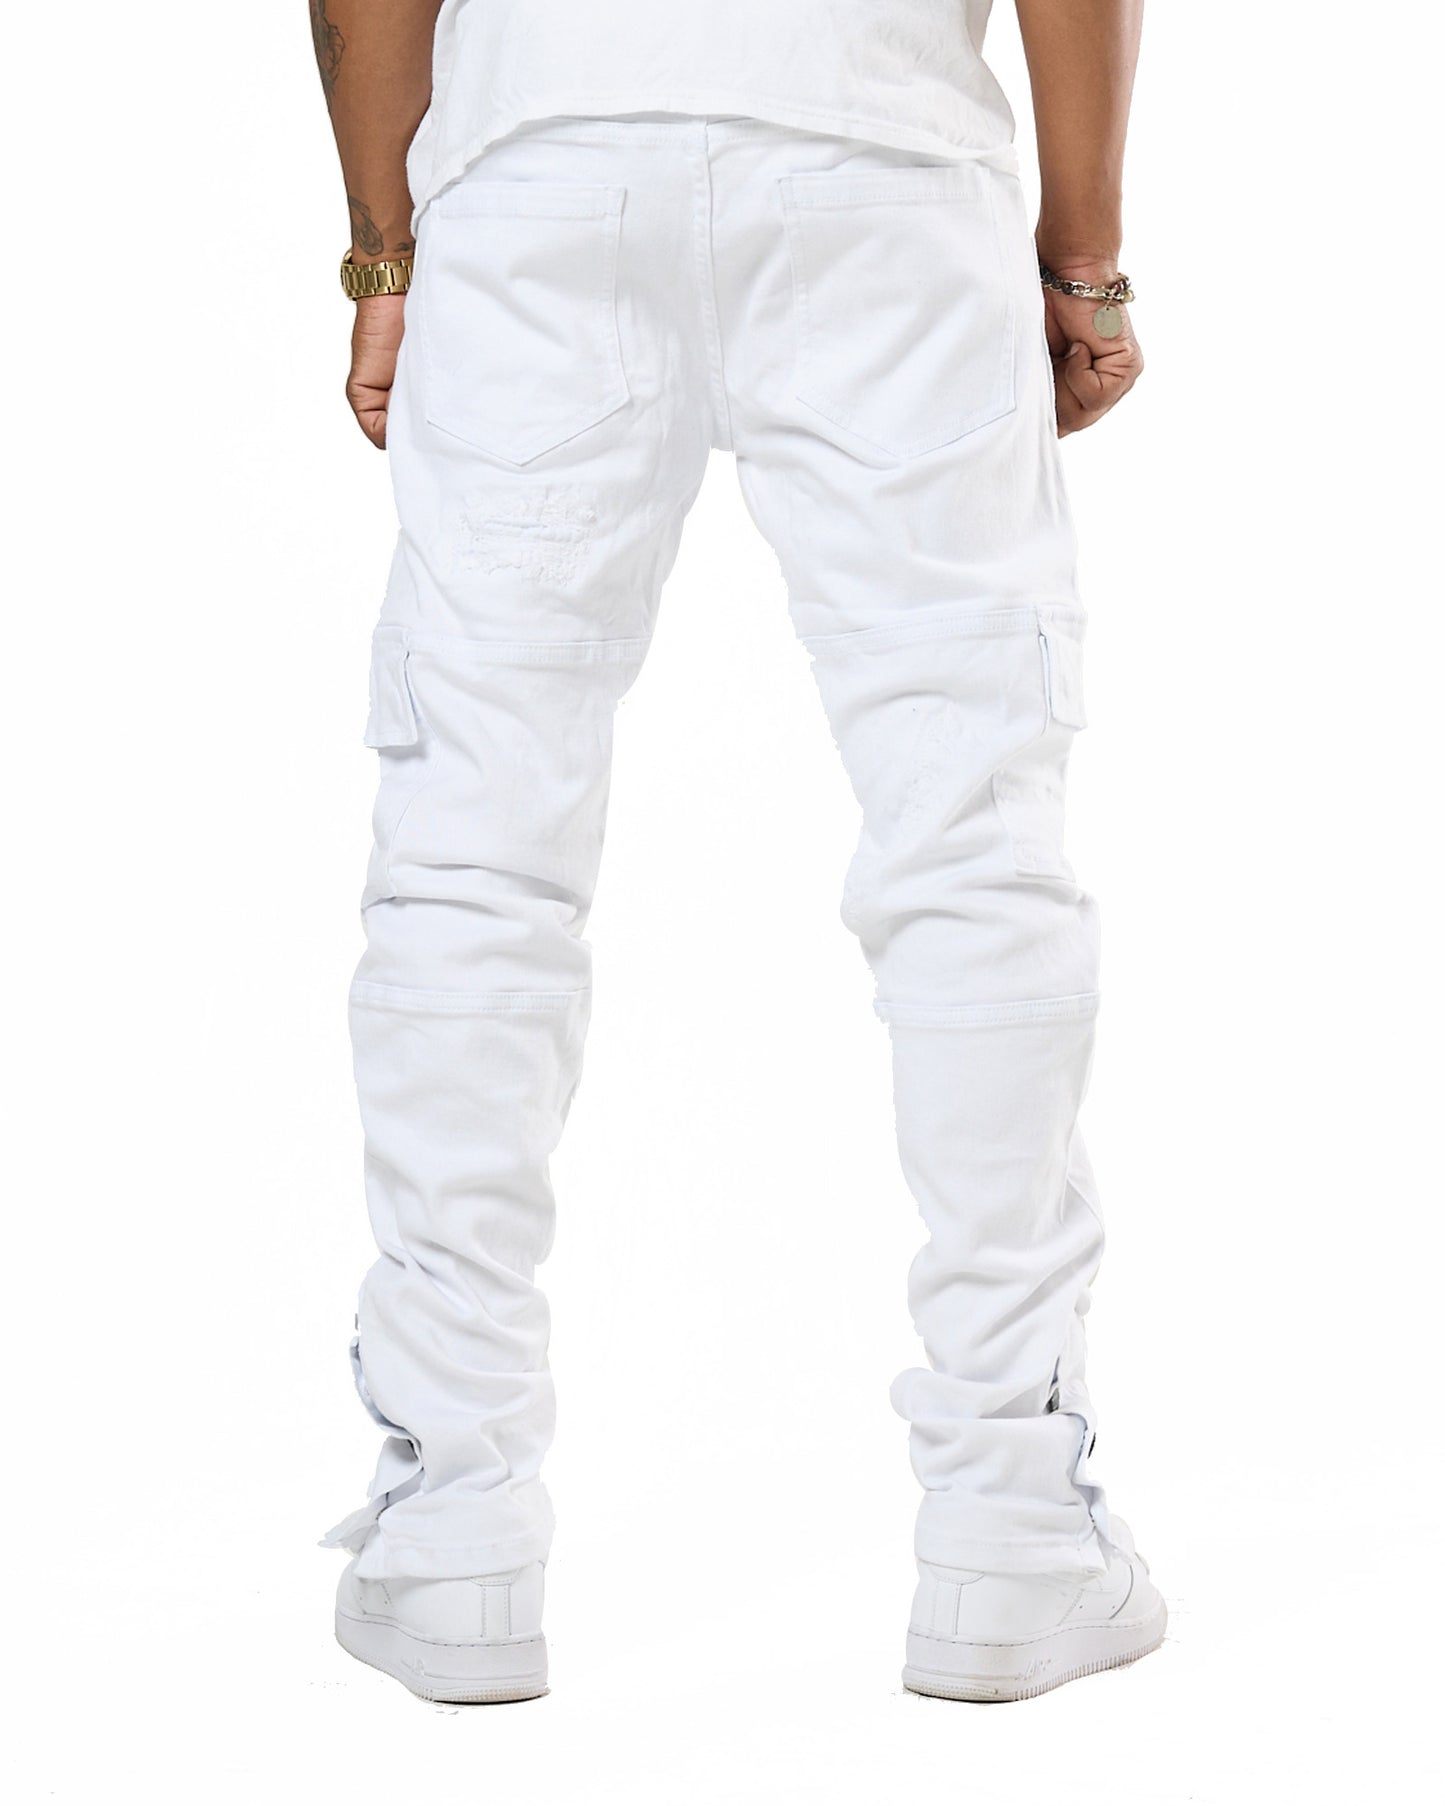 STEAD FAST SLIM FIT JEANS - WHITE